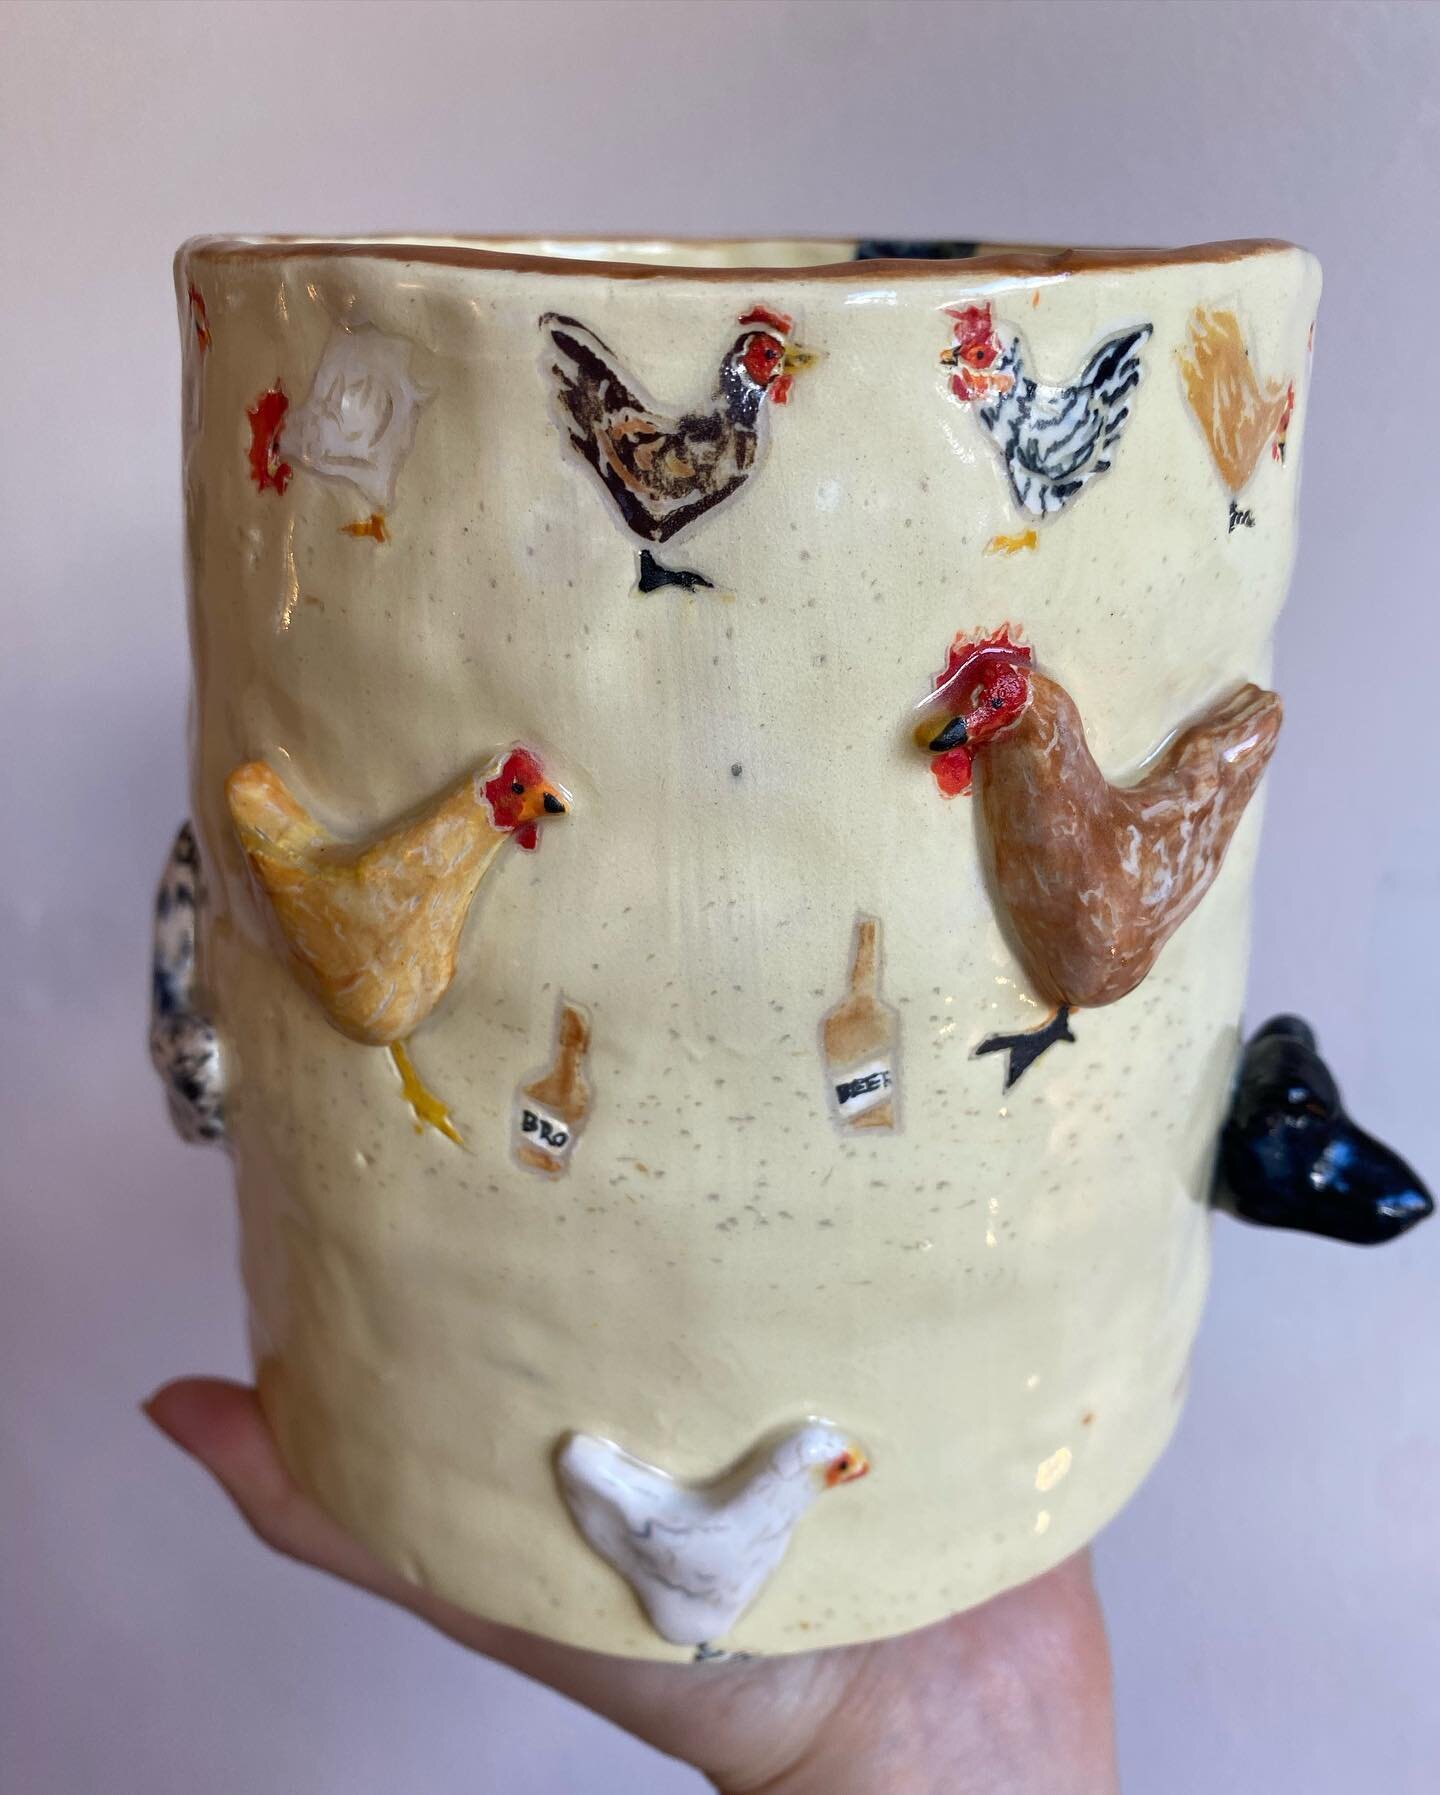 custom🐓🍻container with brobee the dog ( @everydogparknyc ) and @frecklepapi as chickens 

#chicken #beer #dog #brooklynartist #ceramics #lol